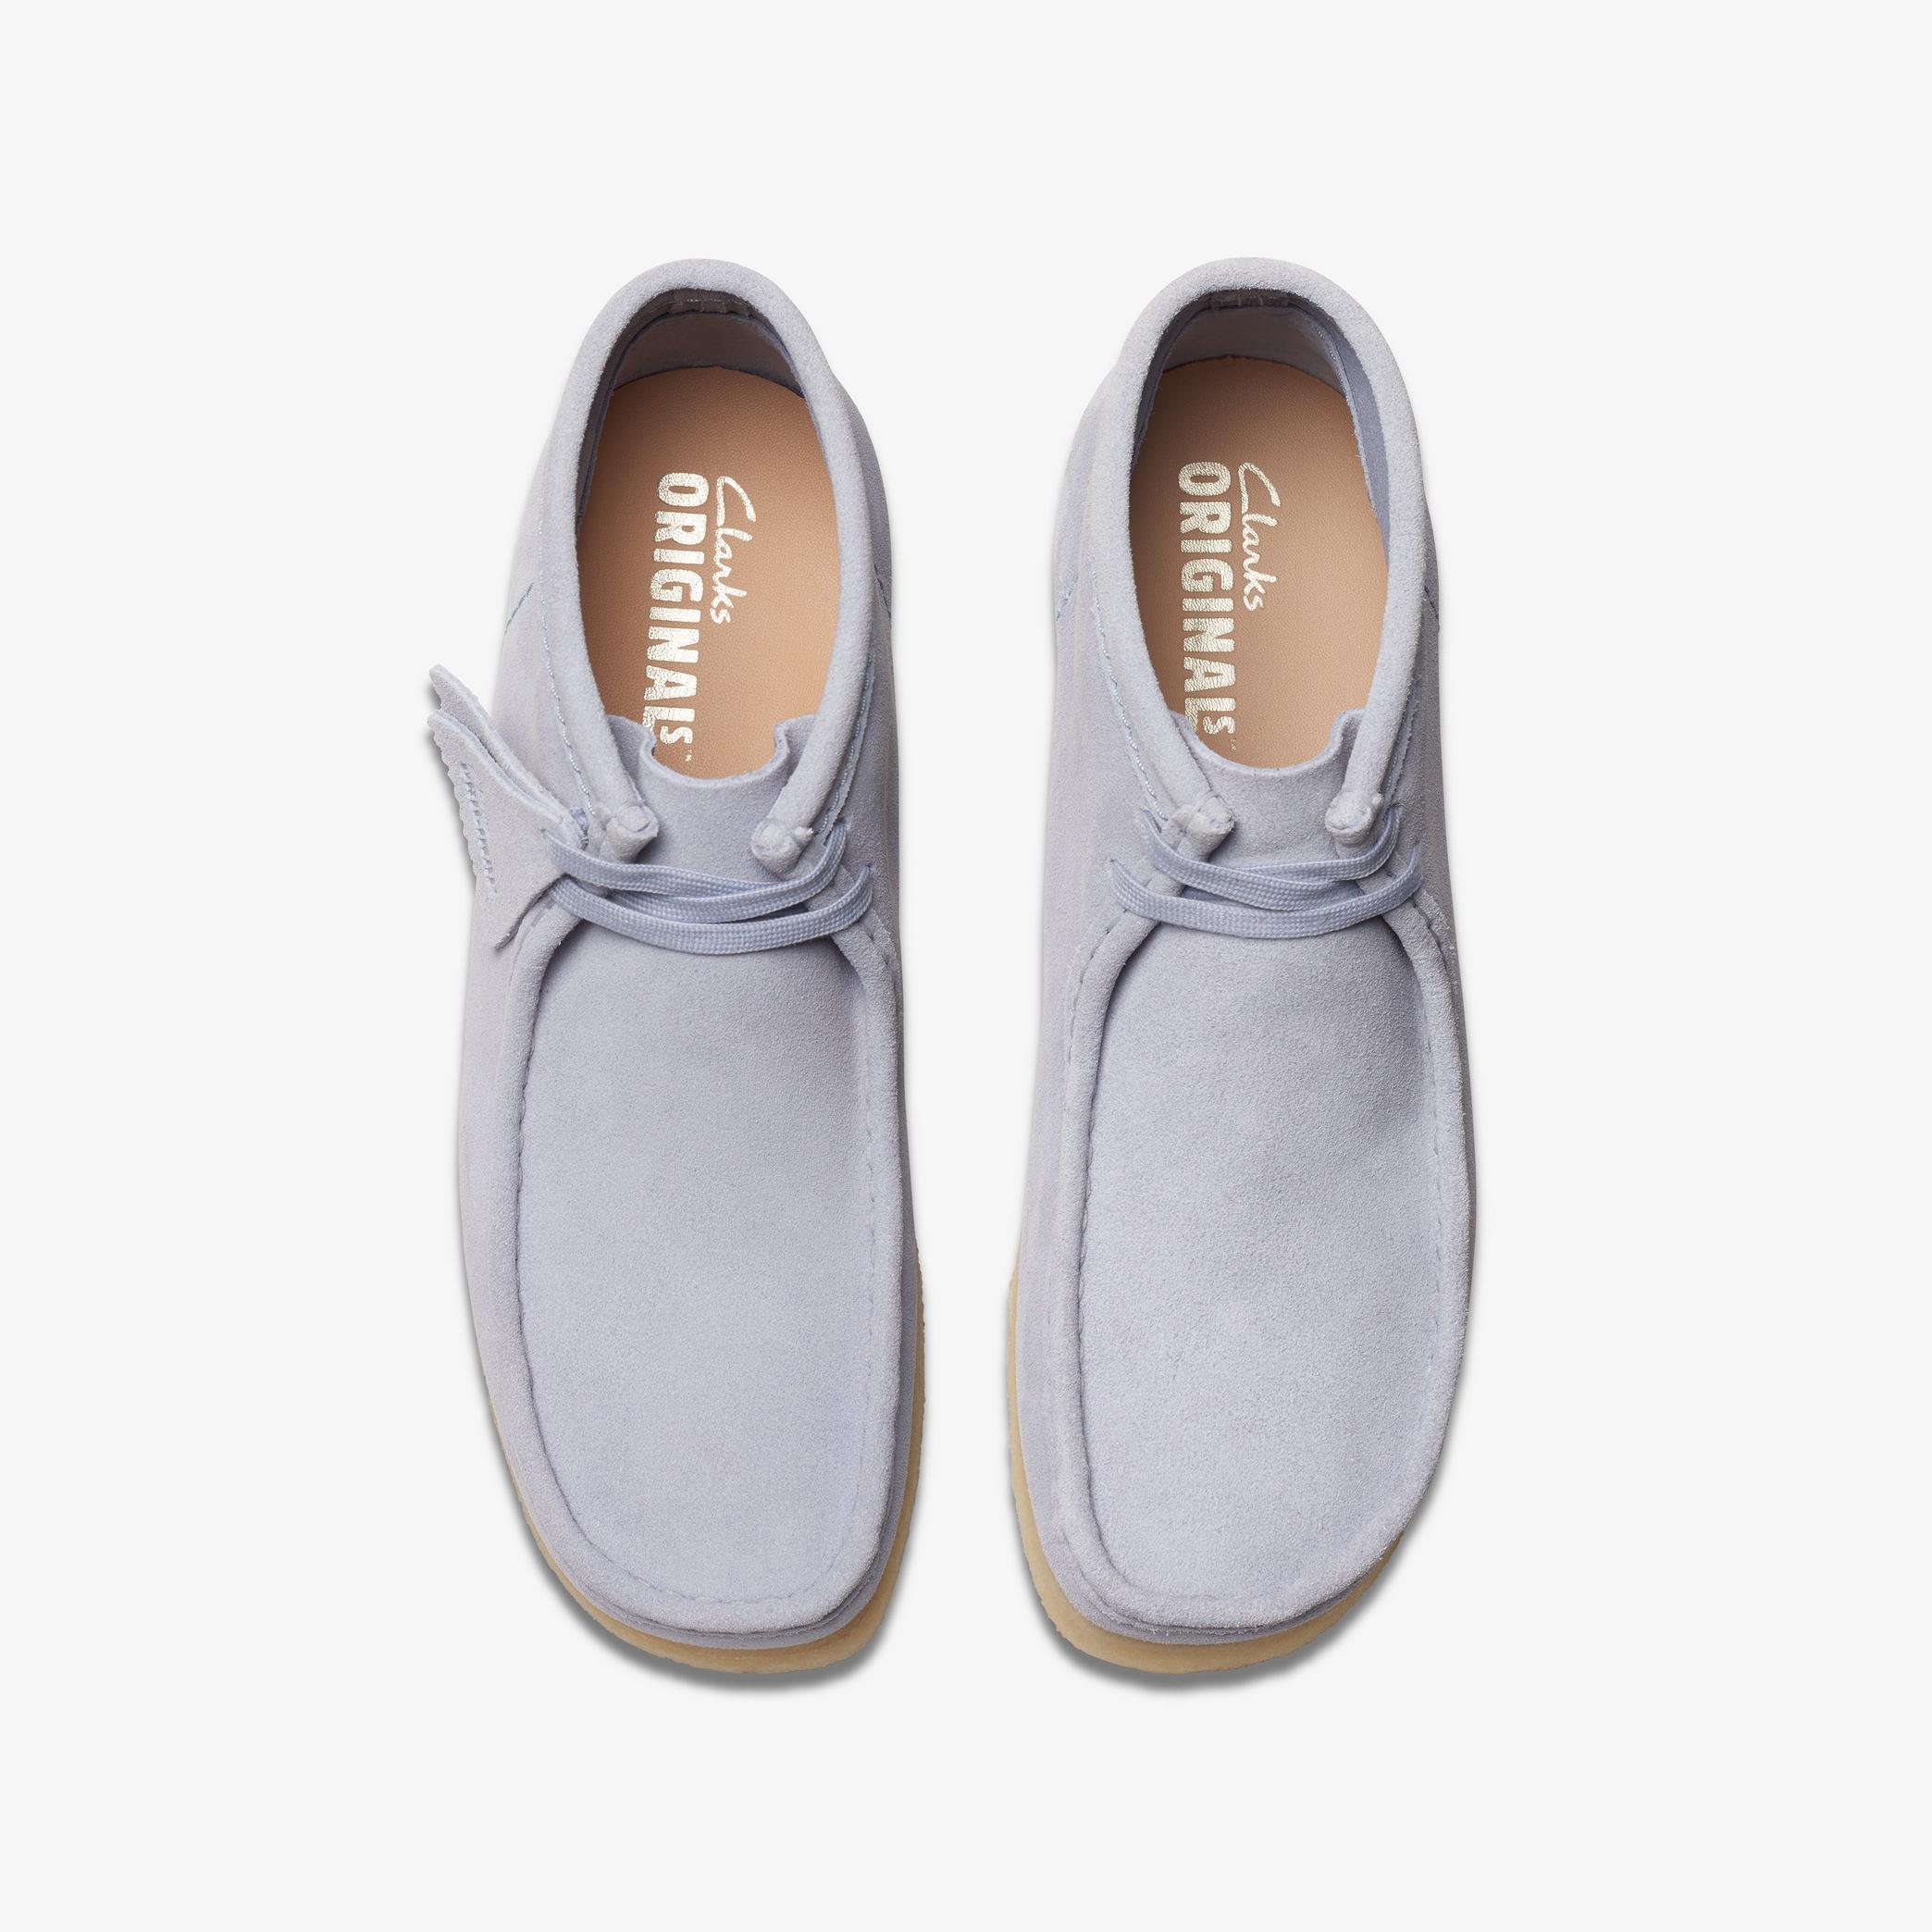 Wallabee Boot Cloud Grey Suede Wallabee, view 6 of 7